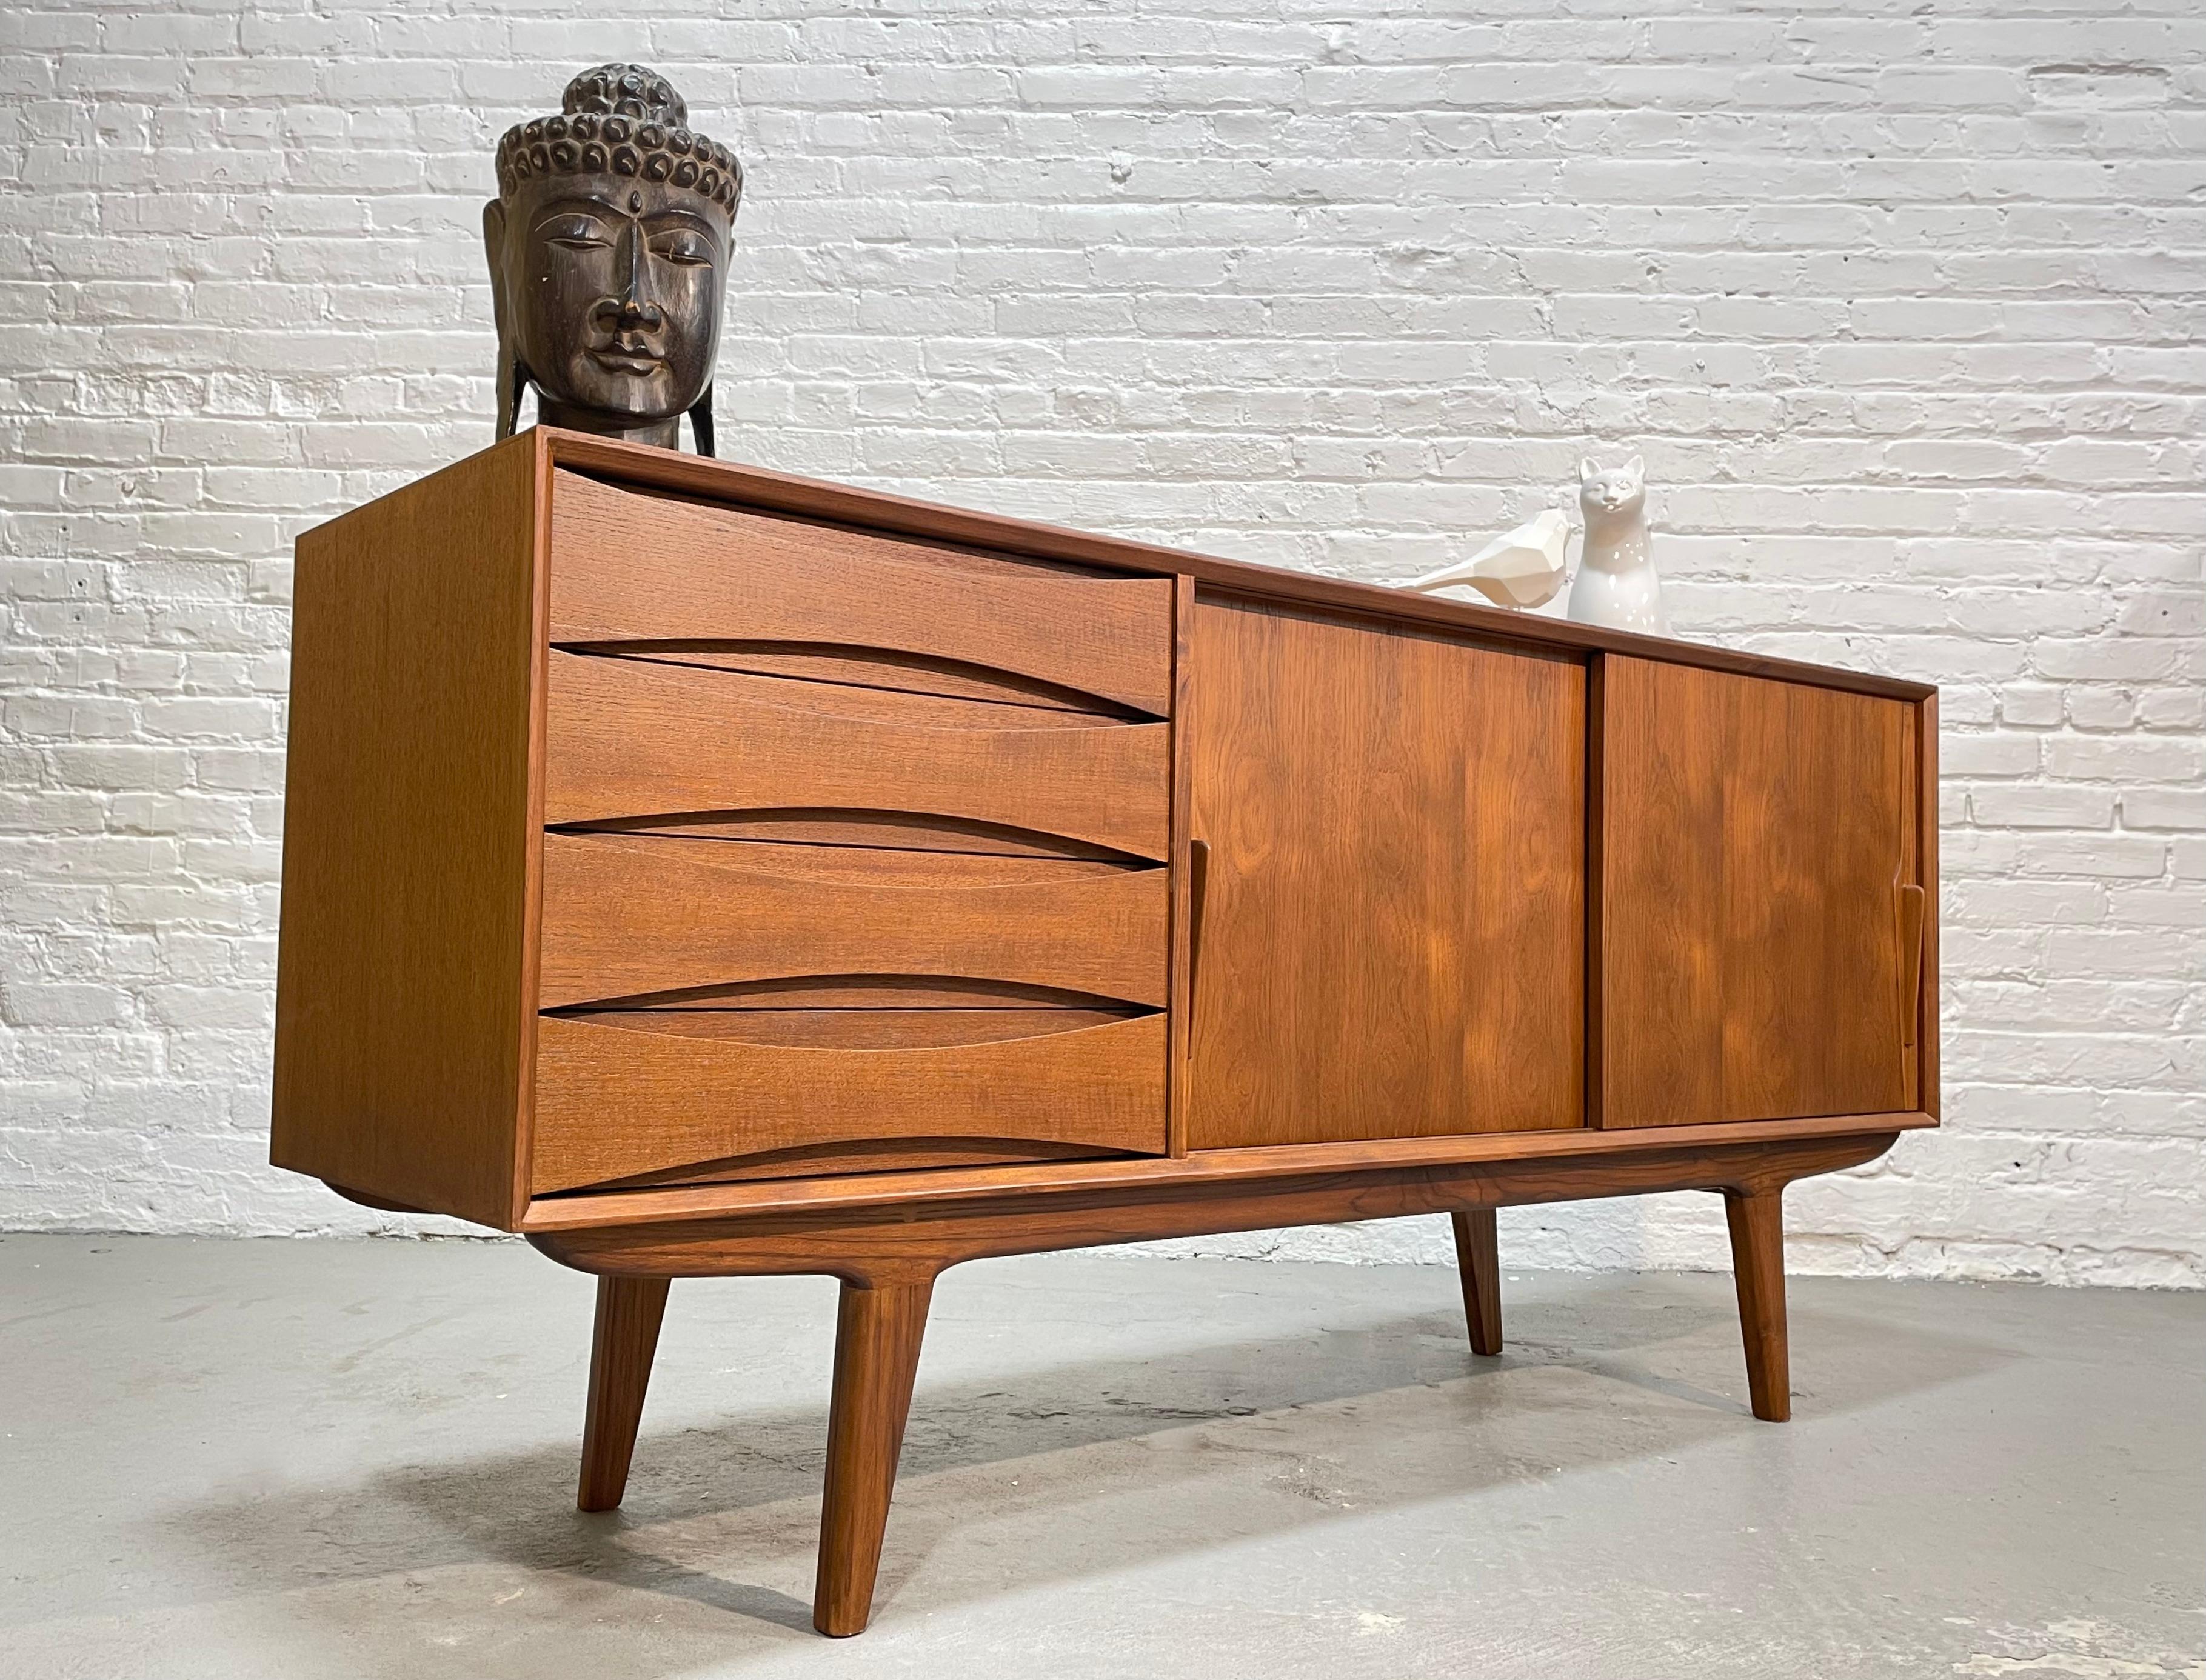  Handsome Mid Century MODERN styled SIDEBOARD / CREDENZA media stand In New Condition For Sale In Weehawken, NJ